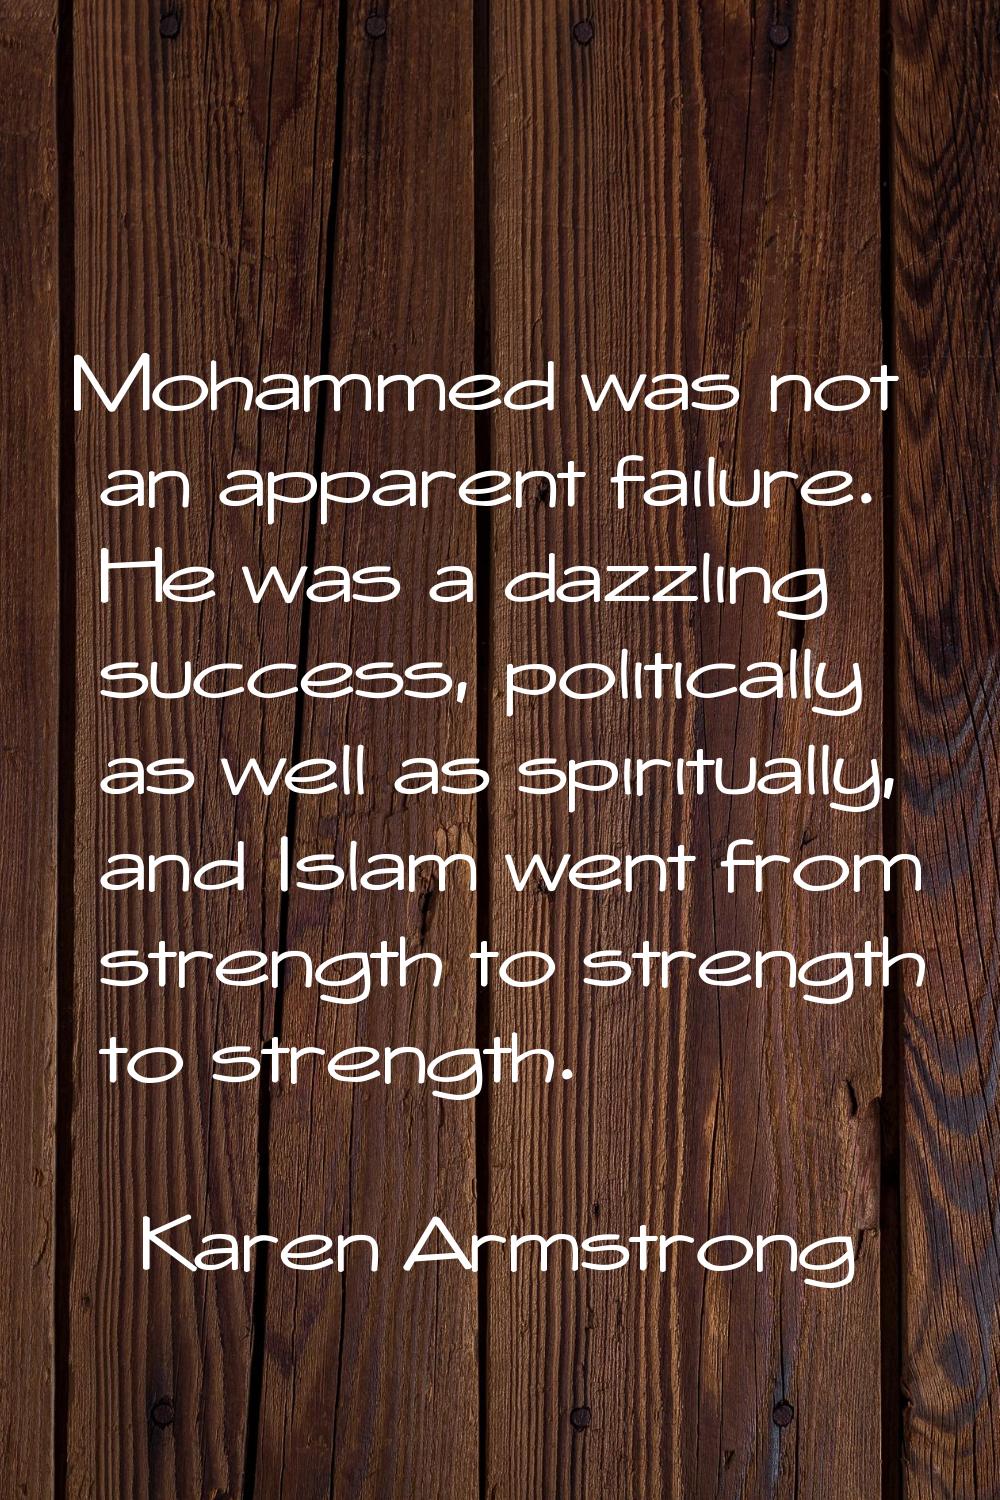 Mohammed was not an apparent failure. He was a dazzling success, politically as well as spiritually